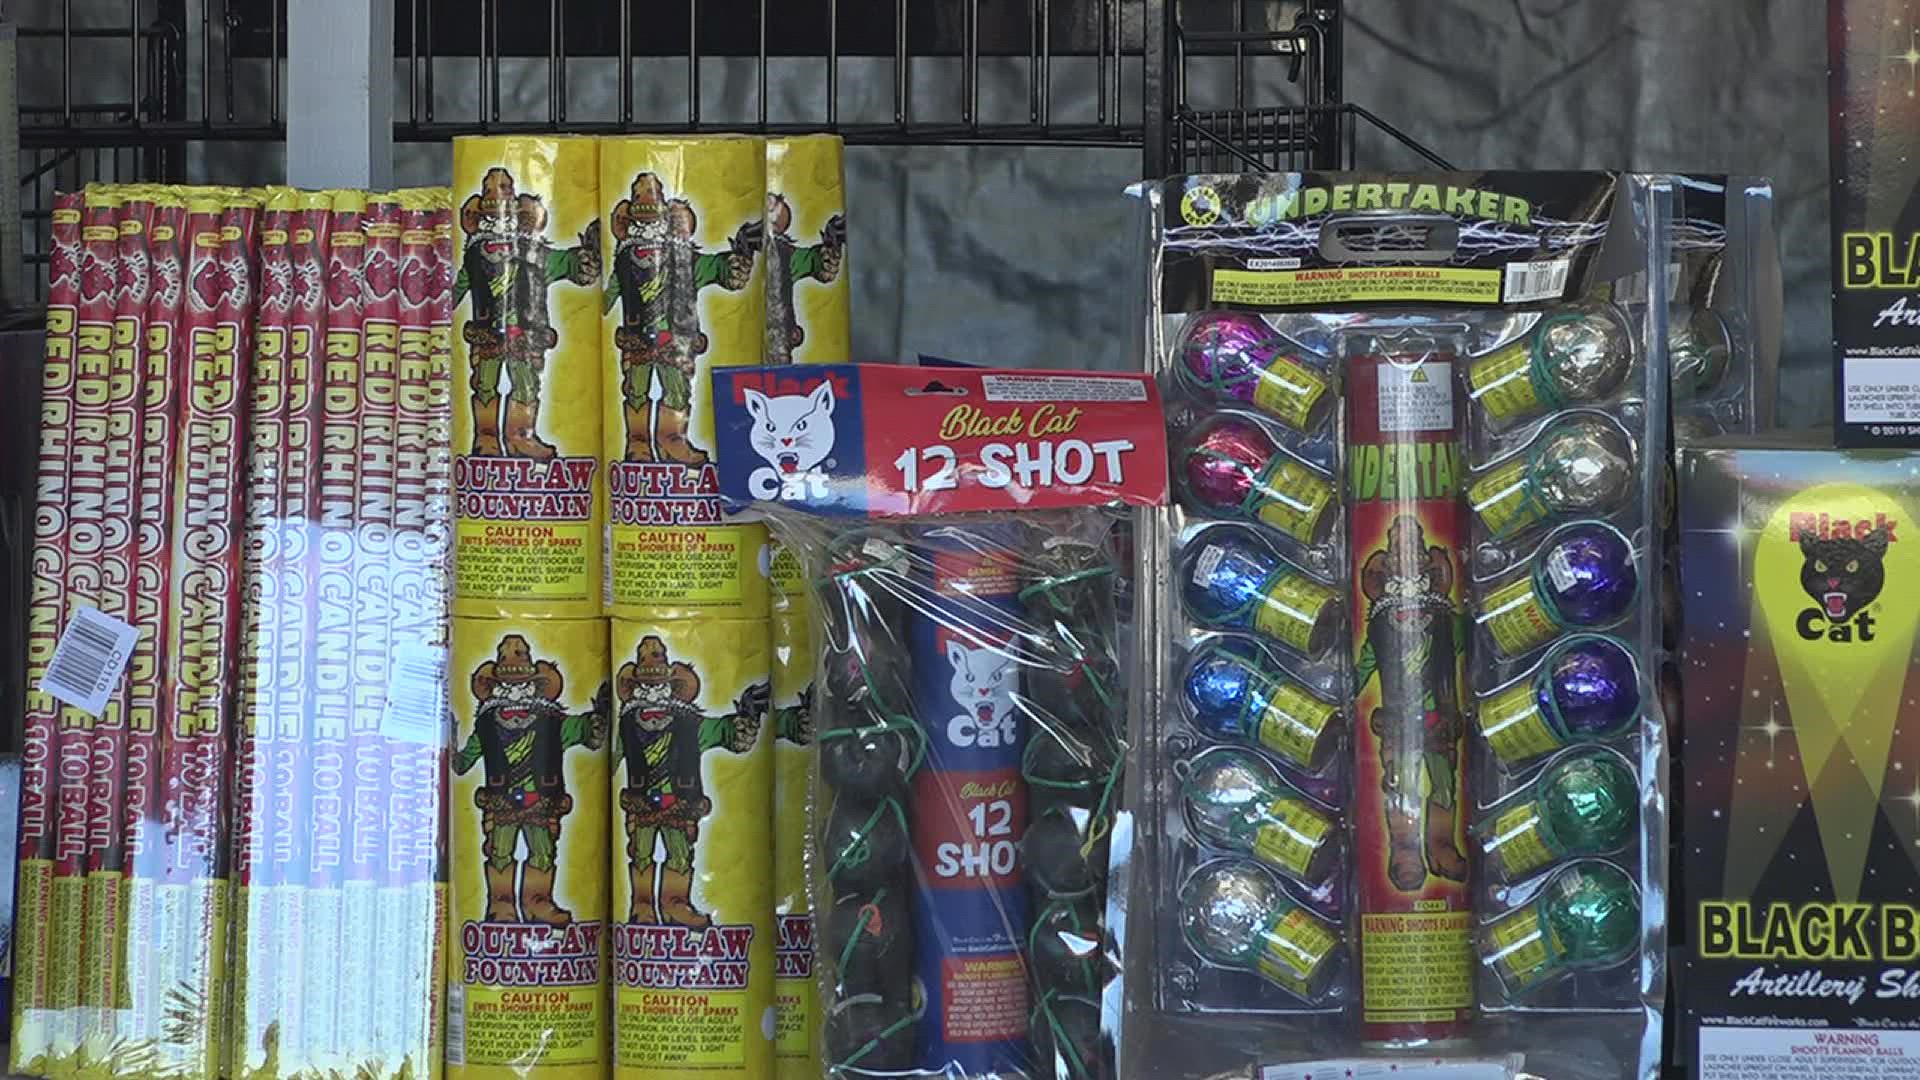 Fireworks are only legal in some parts of Jefferson County. One area where they are not legal is Nederland.